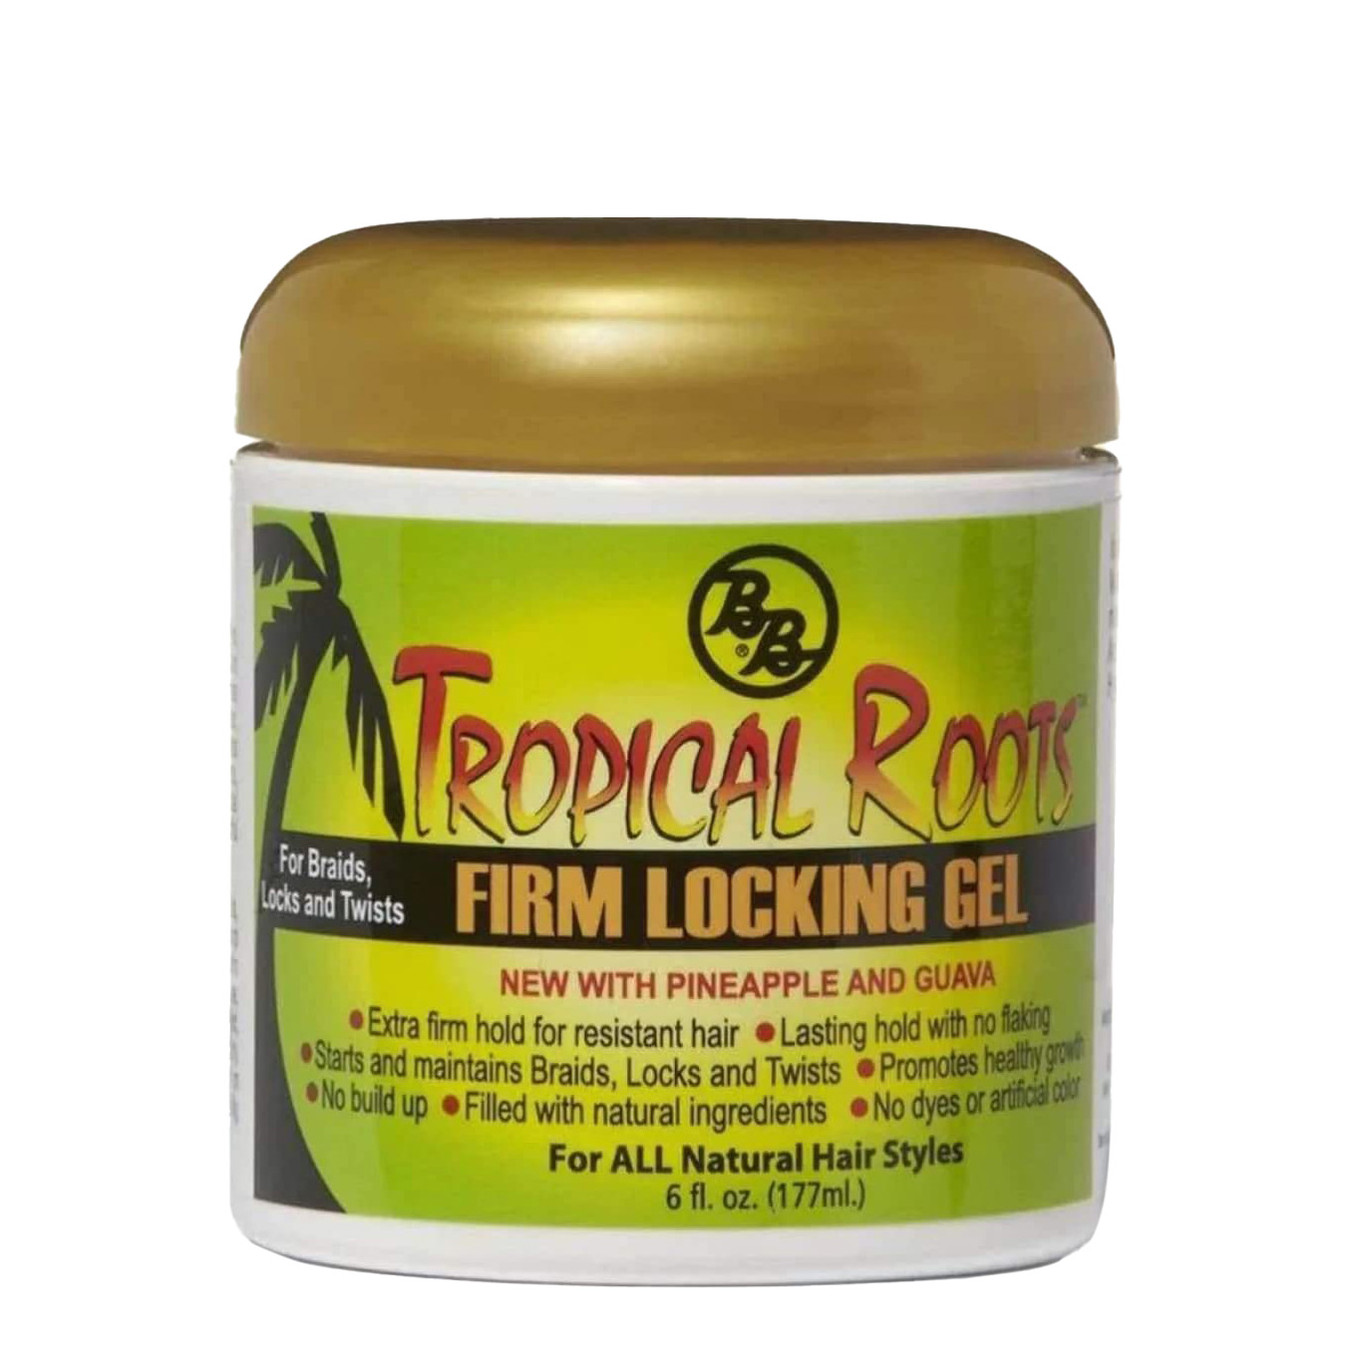 Bronner Brothers Tropical Roots Firm Locking Gel (6 oz)